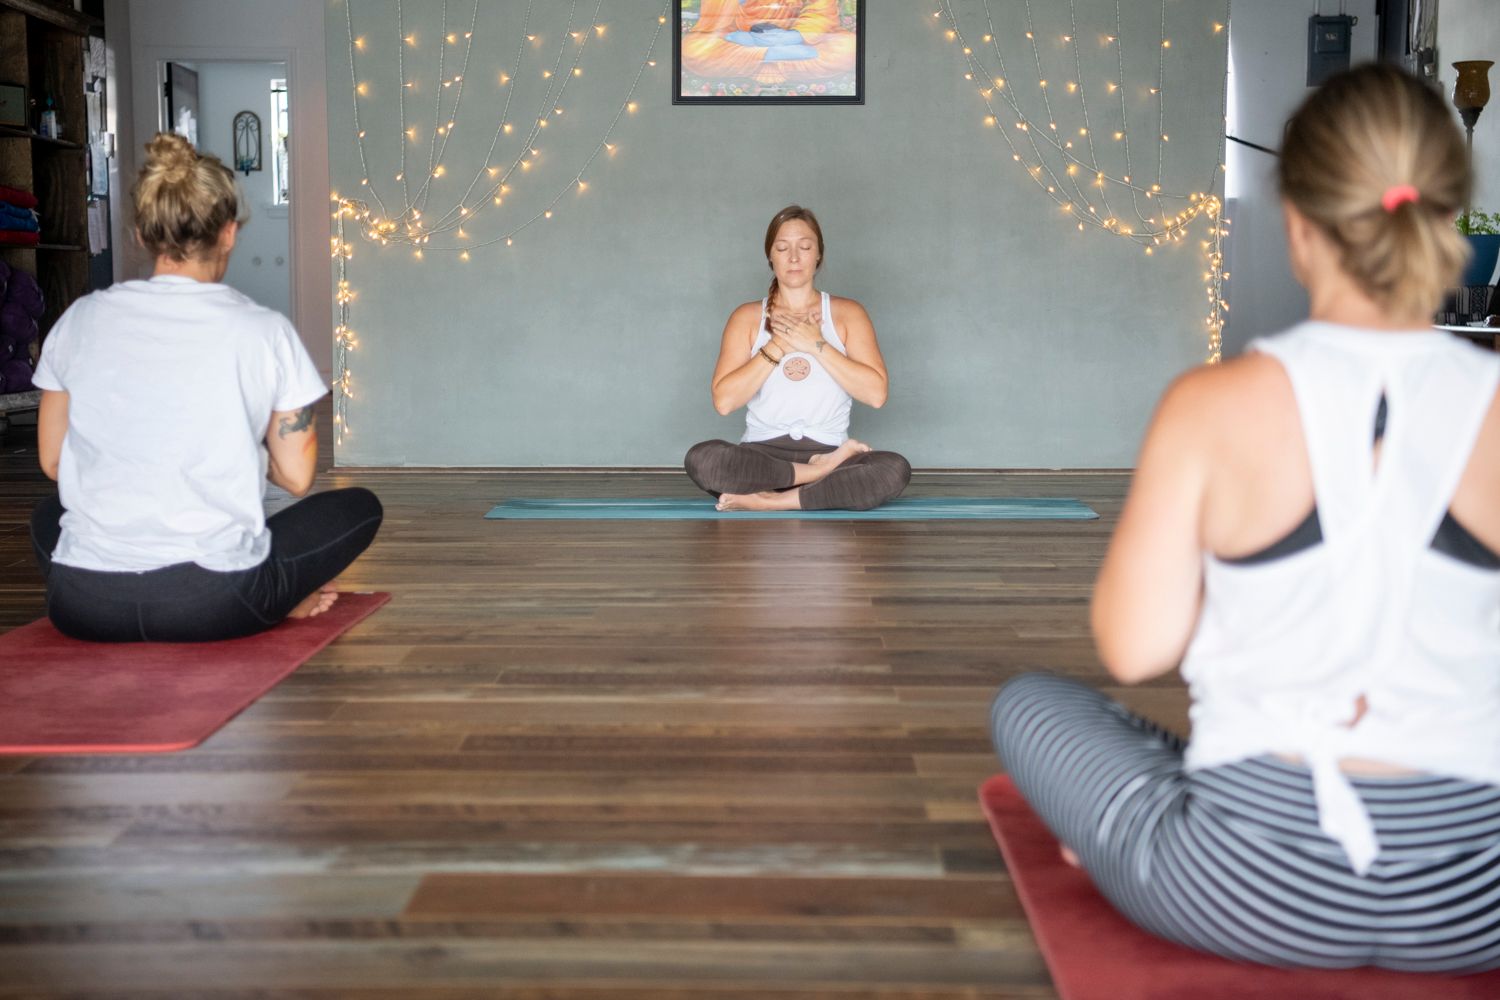 High Point Yoga School owner and instructor Jenn Newton leads a group meditation in her High Point, NC yoga studio.